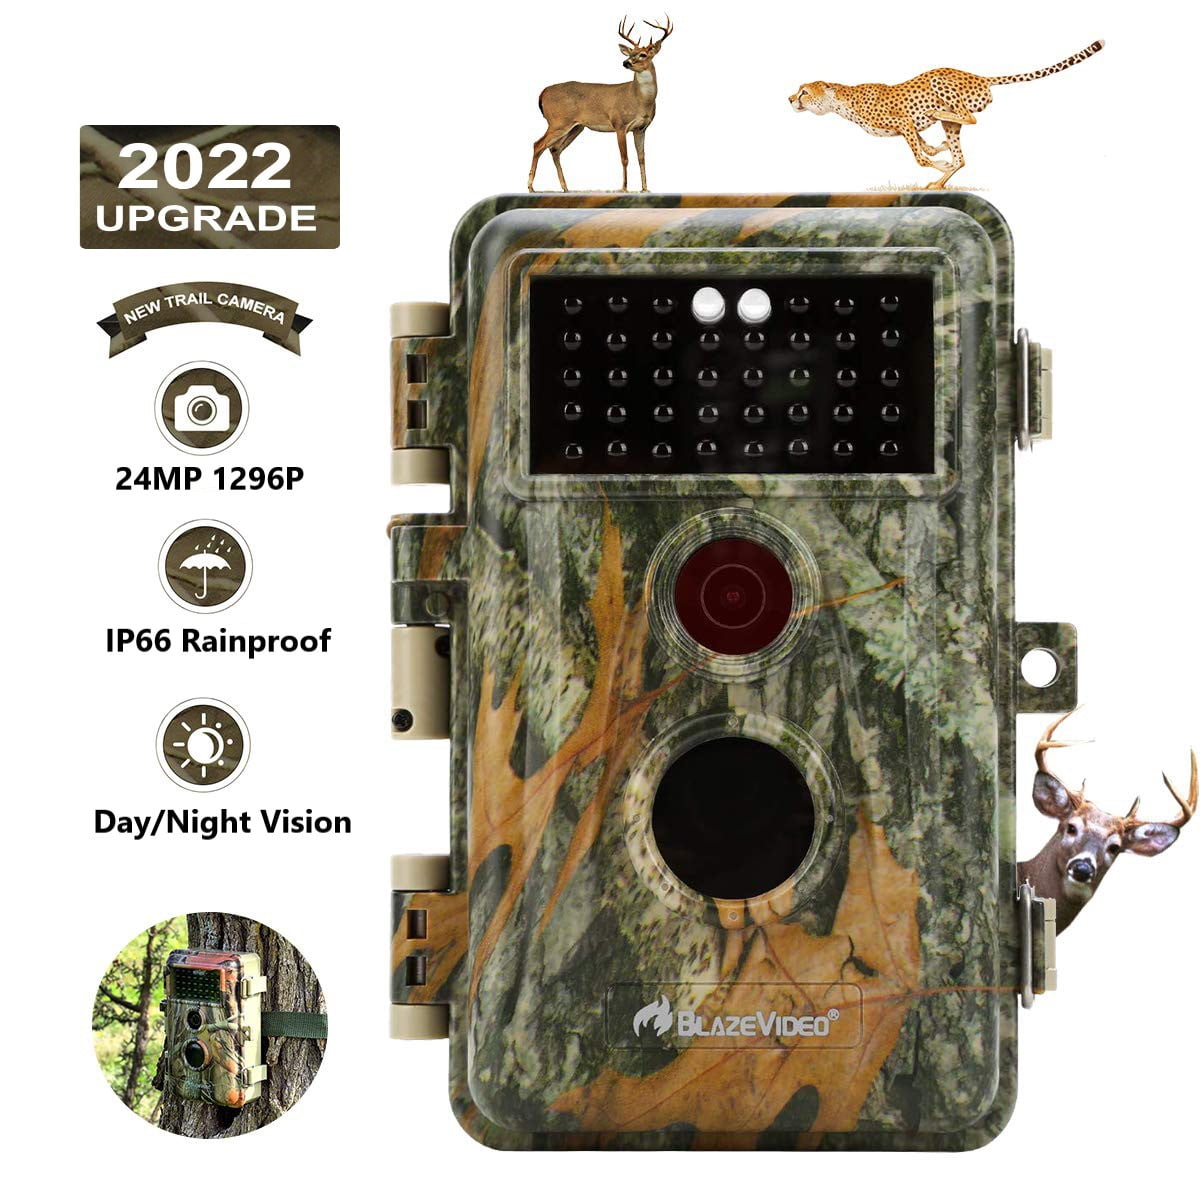 2 PACK Wildgame Innovations Terra Extreme 14MP Trail Game Camera Deer Hunting 